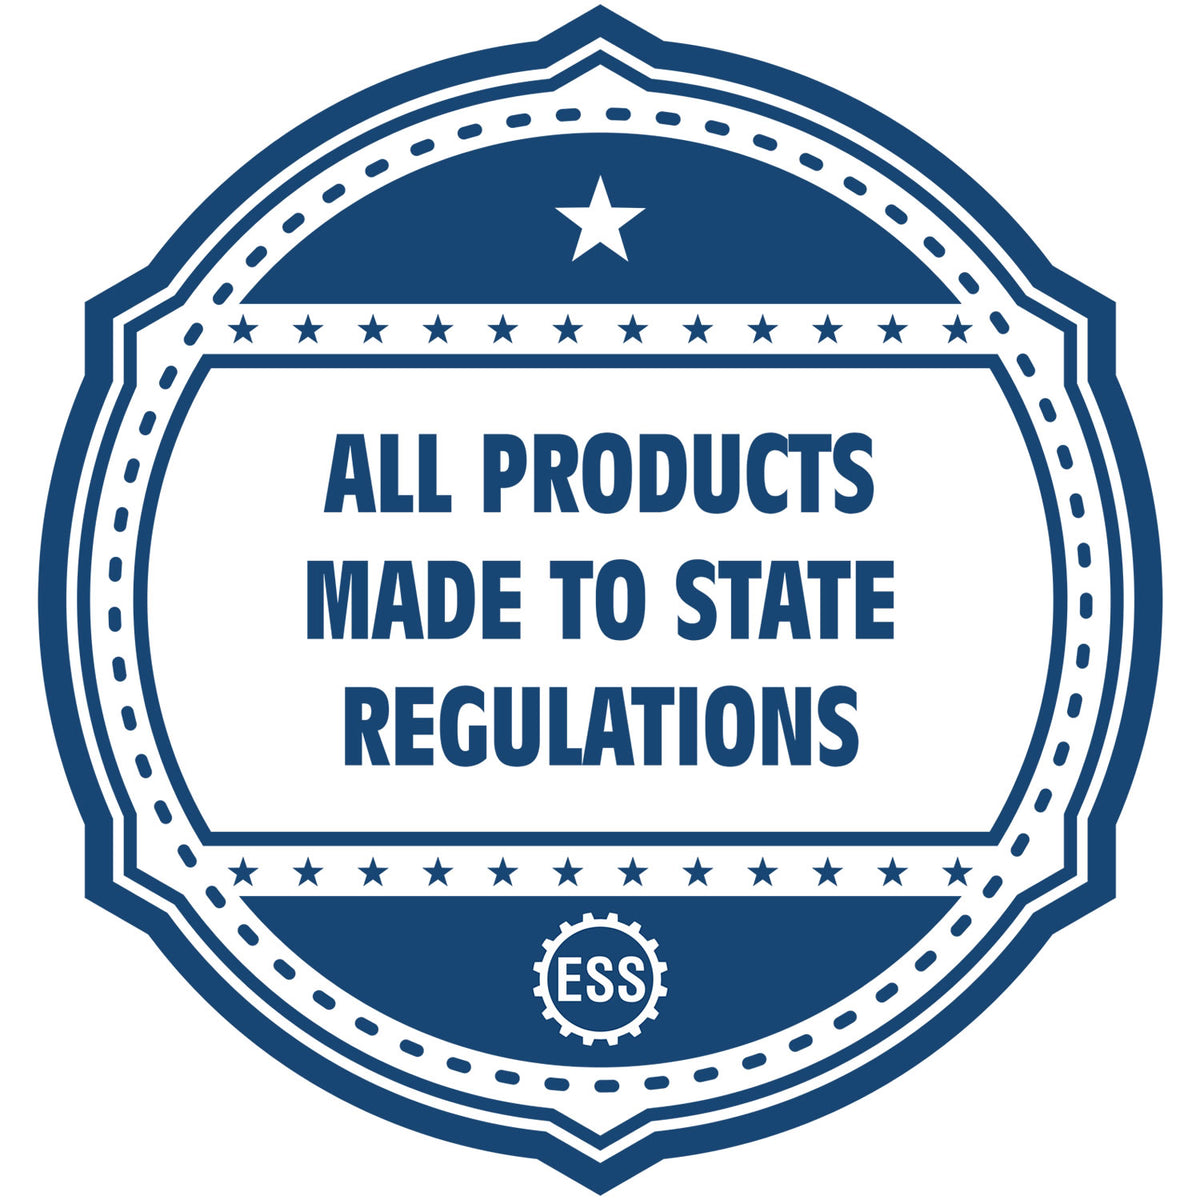 An icon or badge element for the Handheld Mississippi Professional Engineer Embosser showing that this product is made in compliance with state regulations.